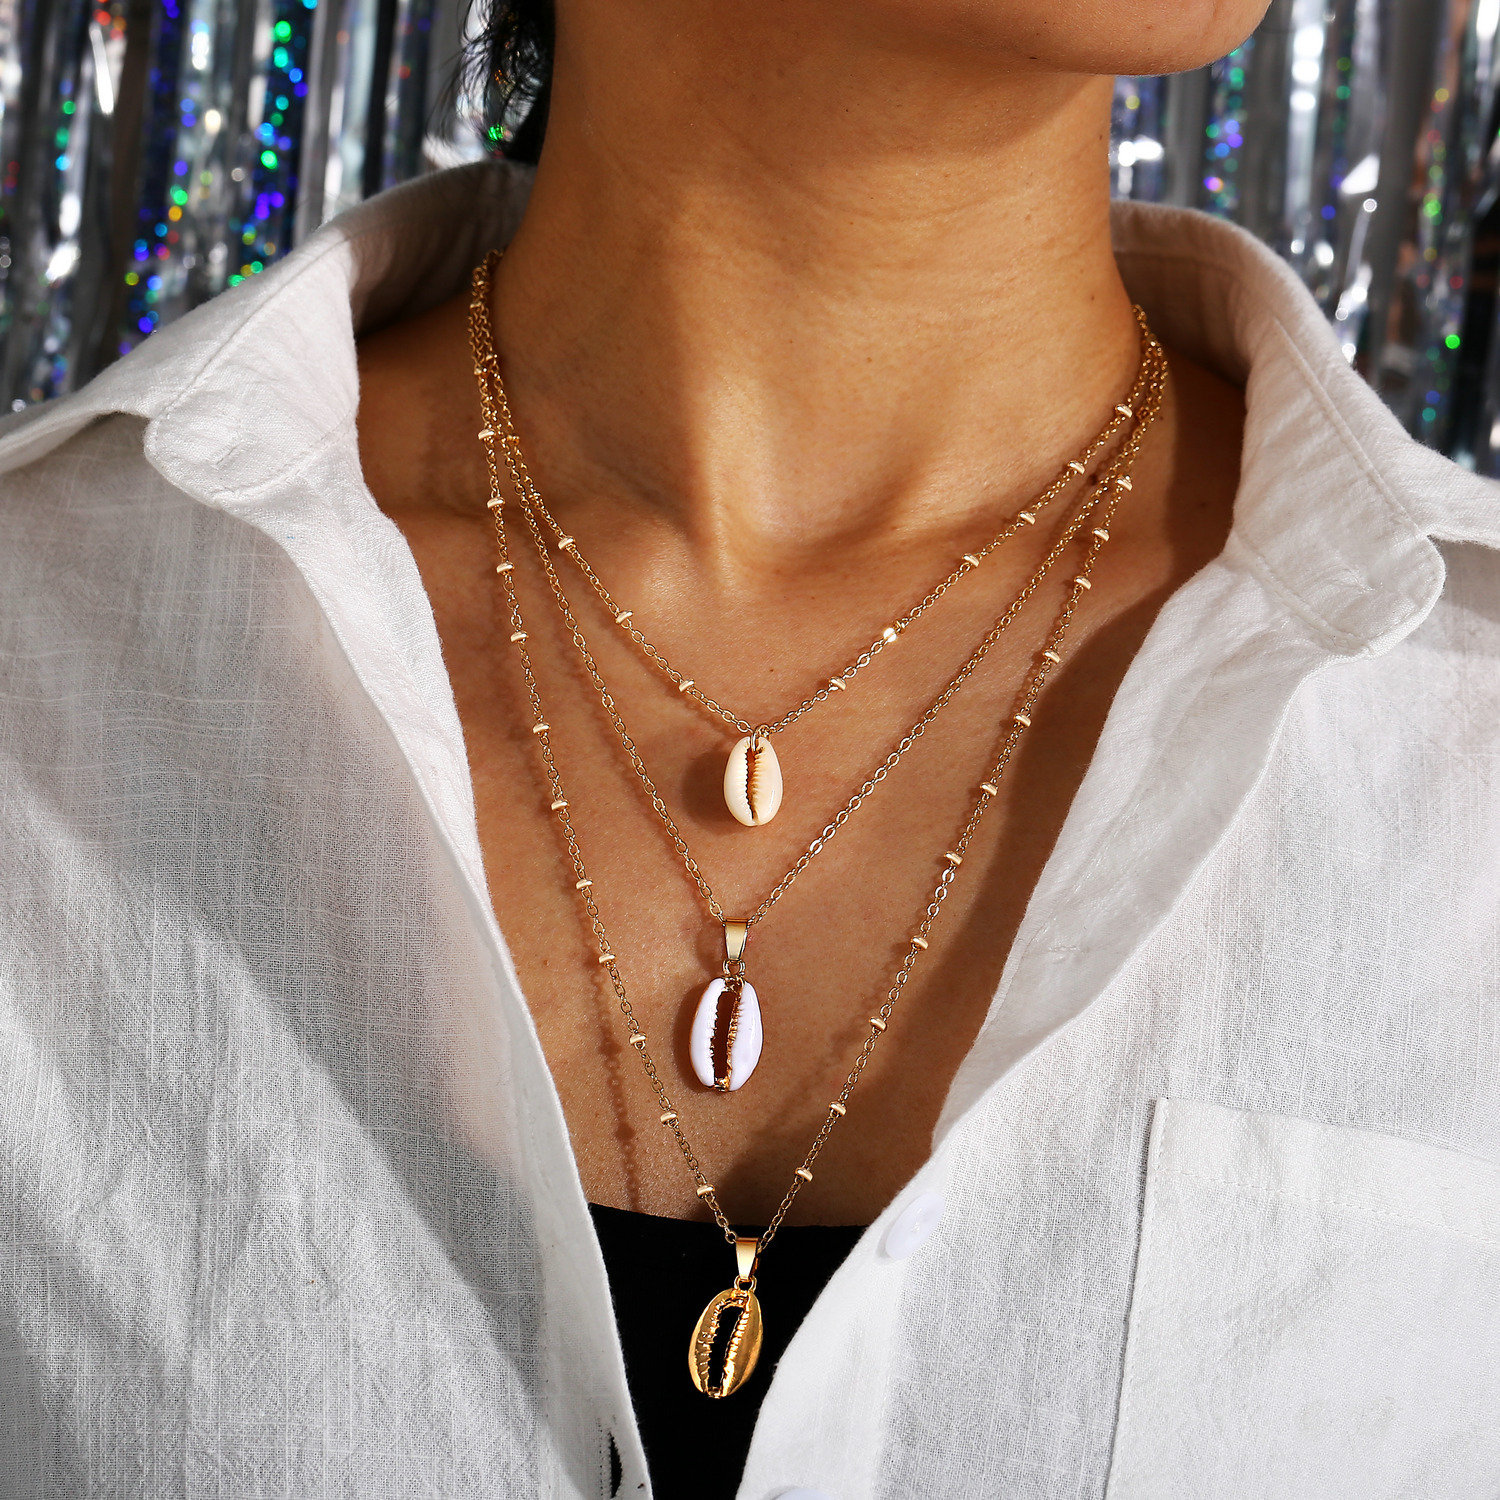 African Style Shellmulti-layer Necklace Gold Metal Conch-inlaid Gold-rimmed Cavicle Chain Necklace